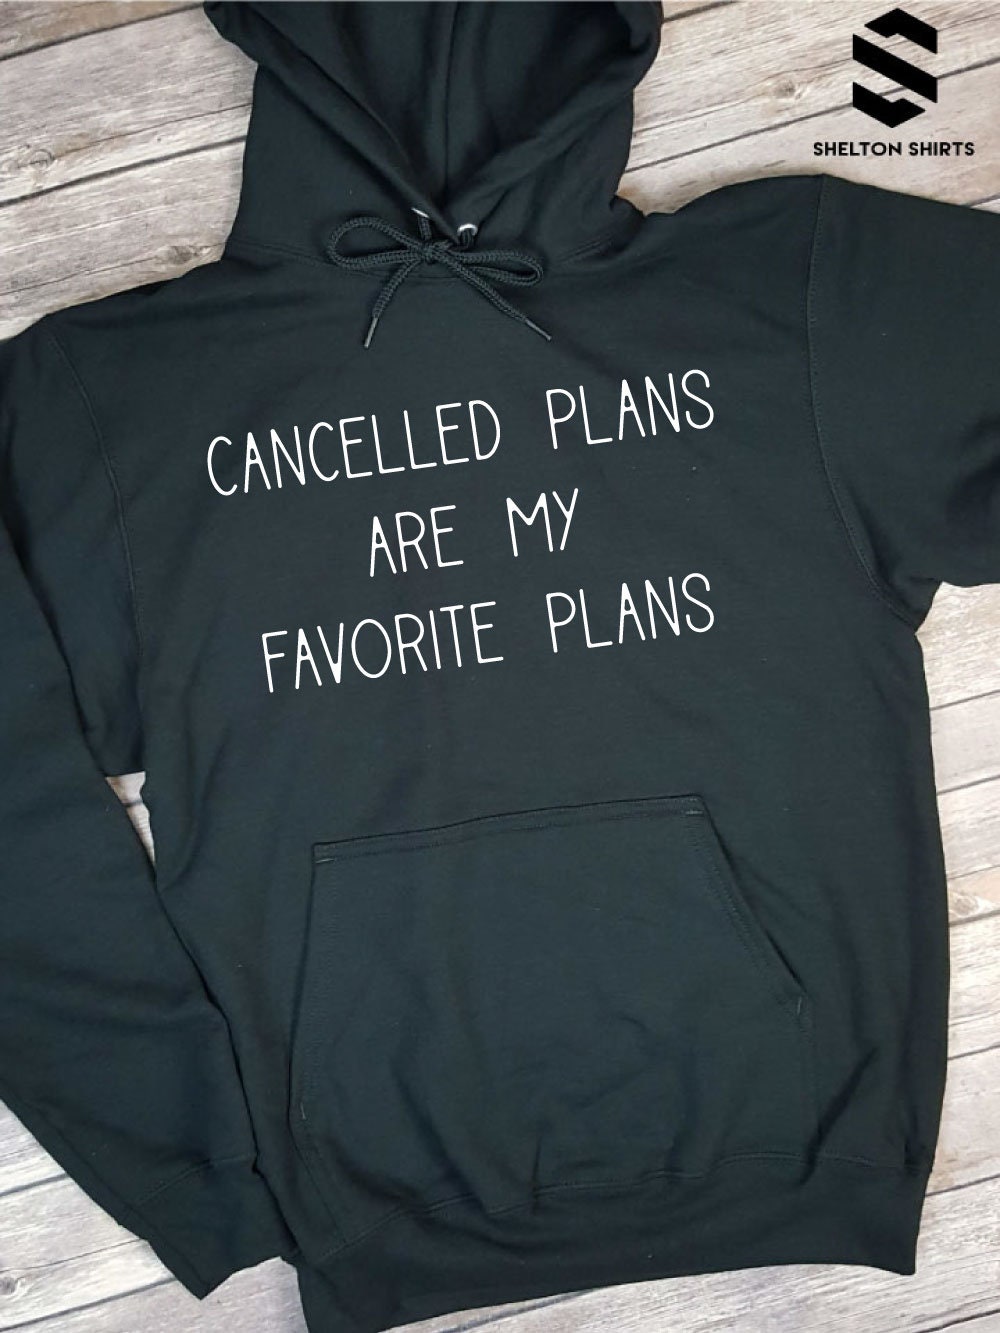 Cancelled Plans Are My Favorite Plans Sweatshirt